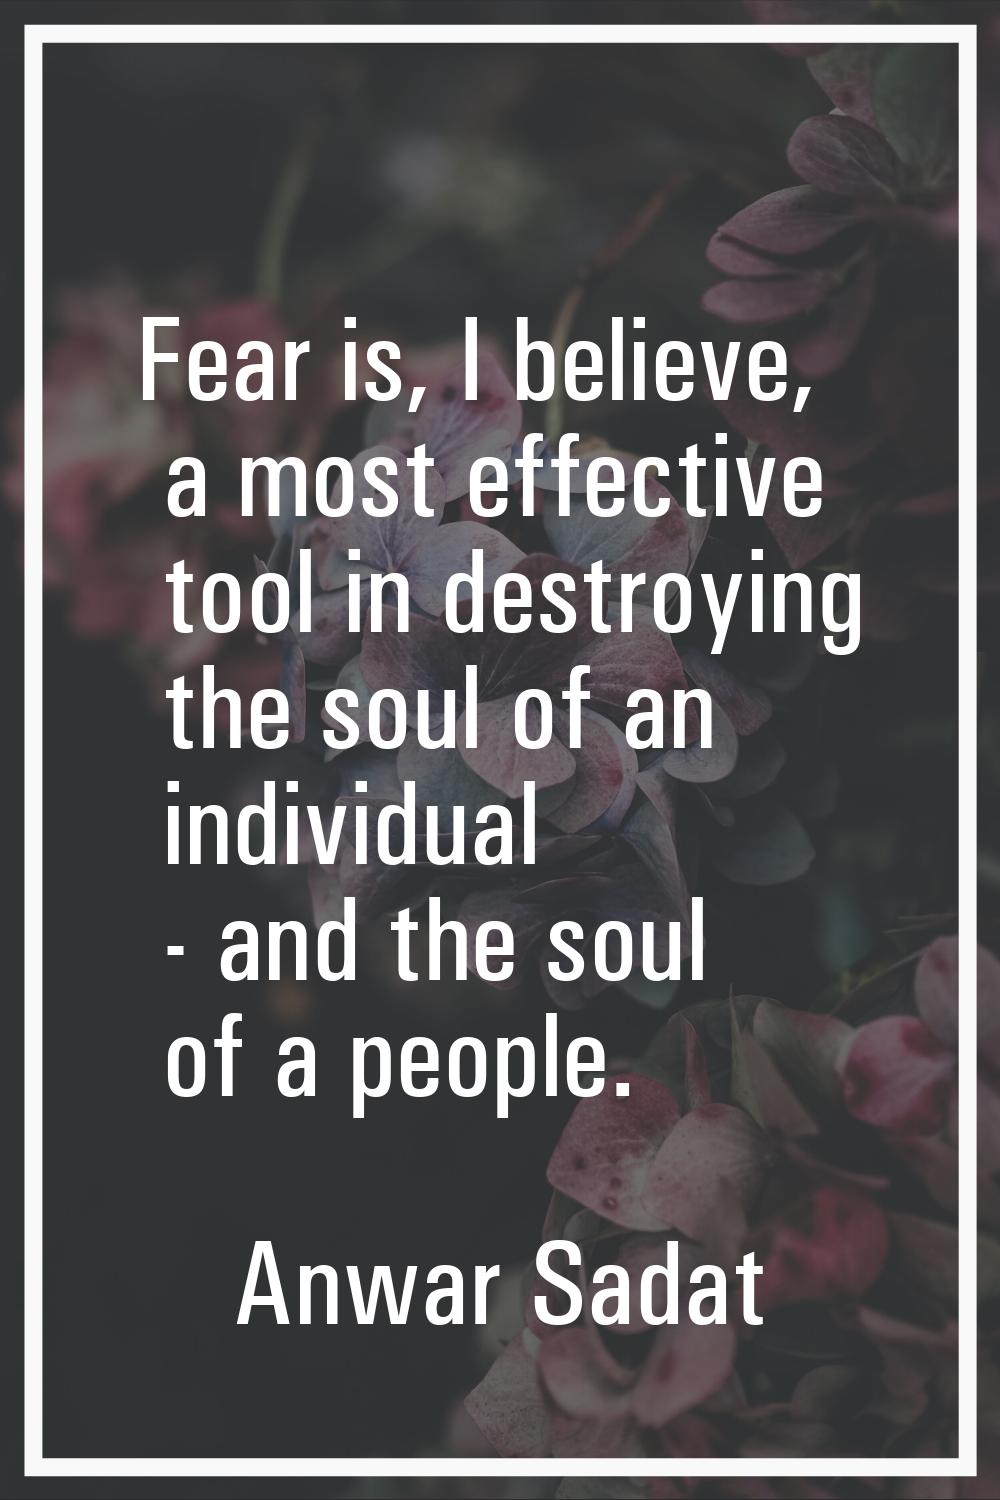 Fear is, I believe, a most effective tool in destroying the soul of an individual - and the soul of